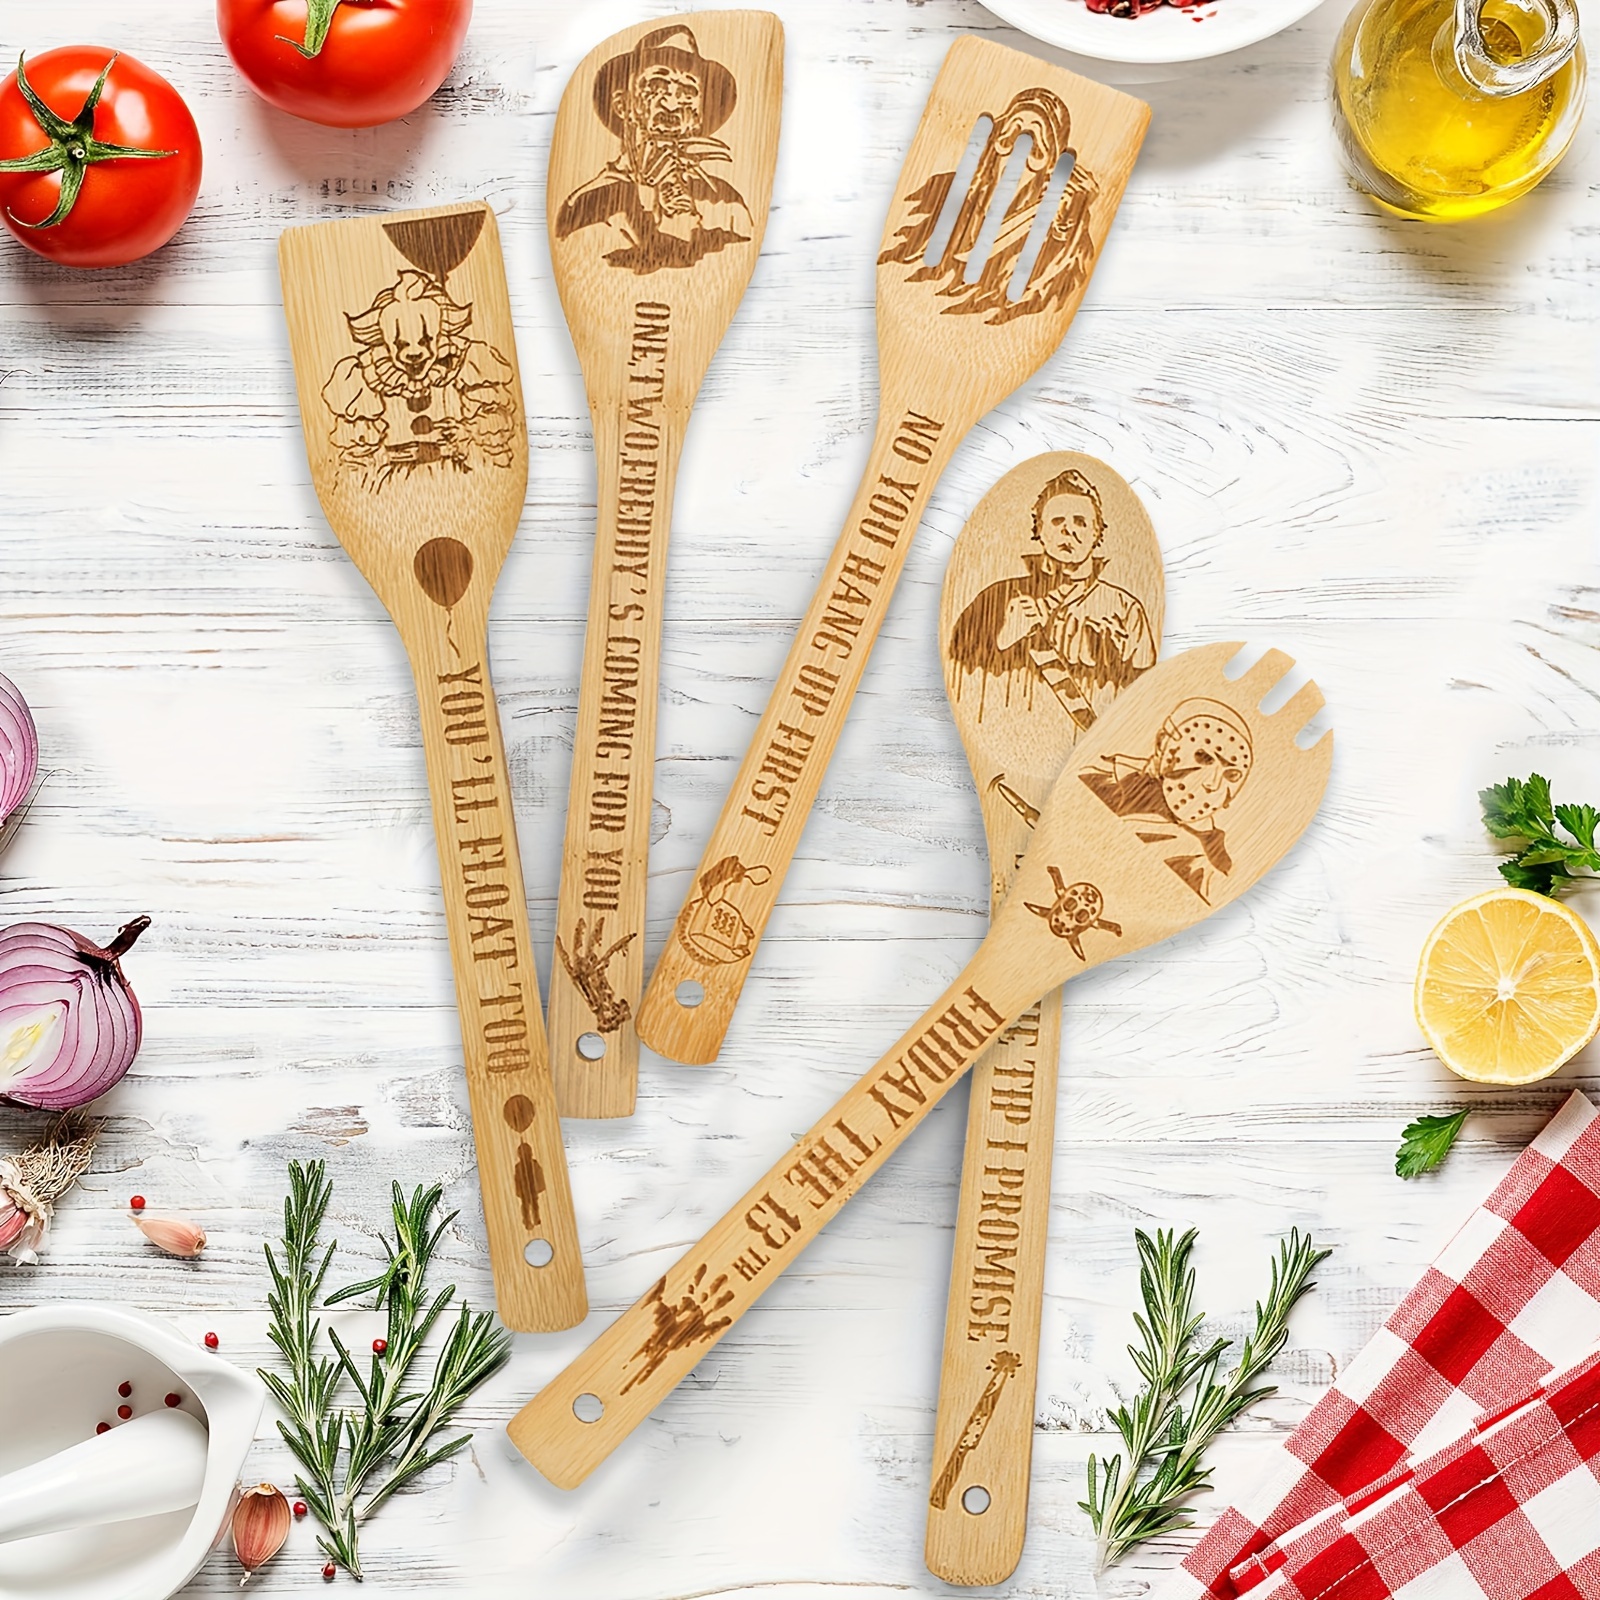 5pcs cooking spoons funny engraved wooden cooking spoons horror character bamboo wood utensils cookware kit horror movie theme kitchen decor gift for movie lover christmas party housewarming birthday gift details 2